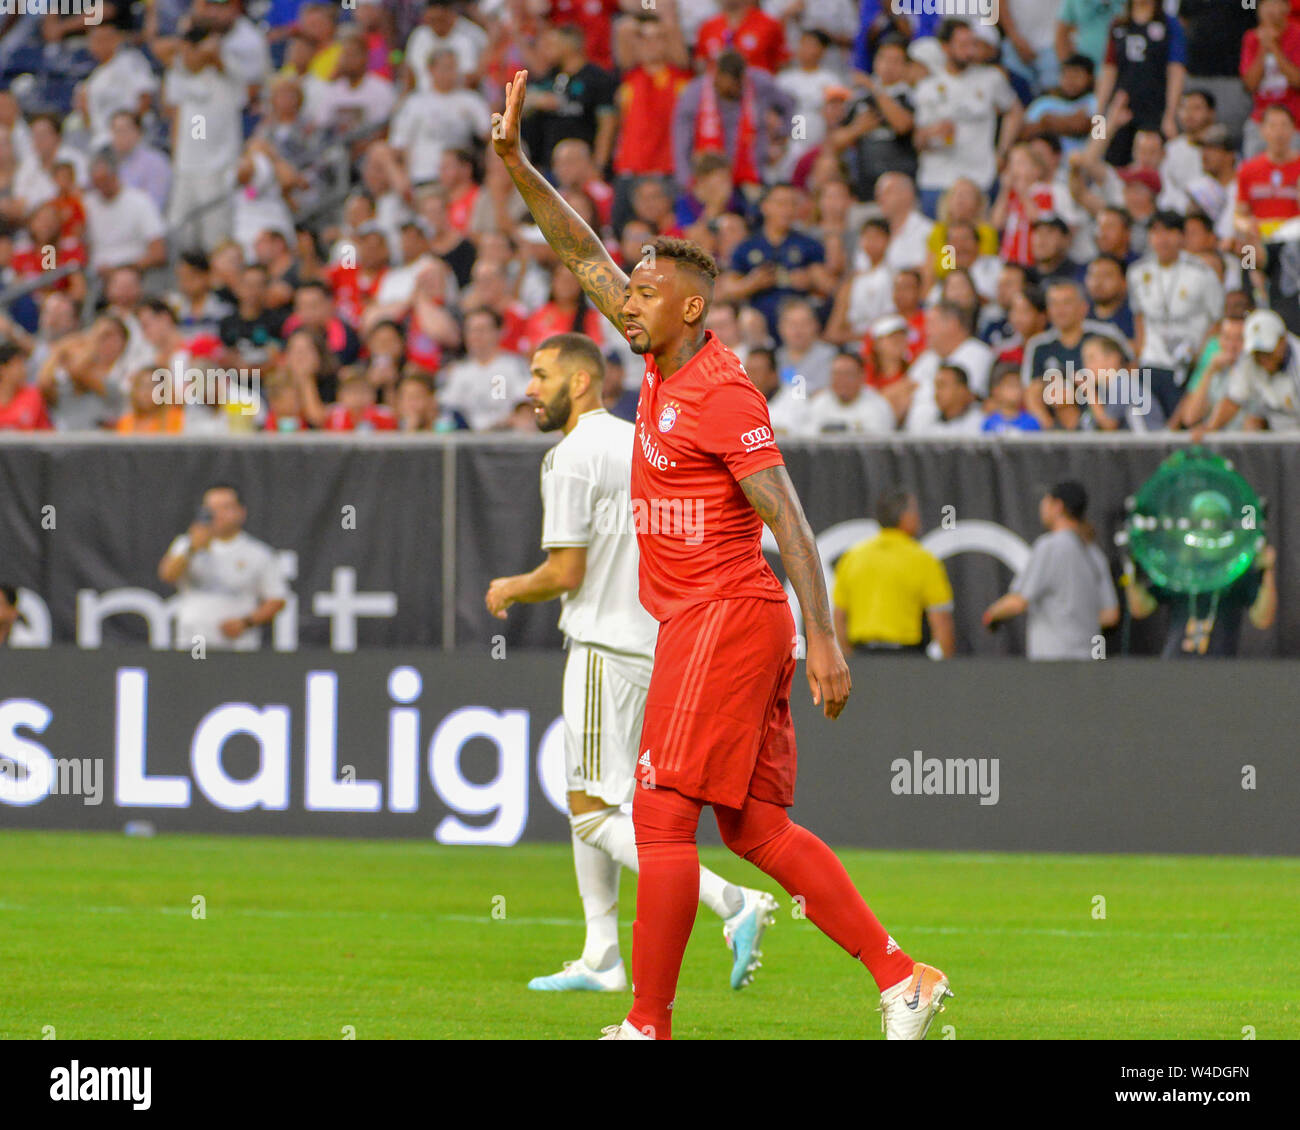 Houston, TX, USA. 20th July, 2019. Bayern defender, Jerome Boateng (17), signals to the bench during the 2019 International Champions Cup match between Real Madrid and FC Bayern, at NRG Stadium in Houston, TX. FC Bayern defeated Real Madrid, 3-1. Mandatory Credit: Kevin Langley/Sports South Media/CSM/Alamy Live News Stock Photo